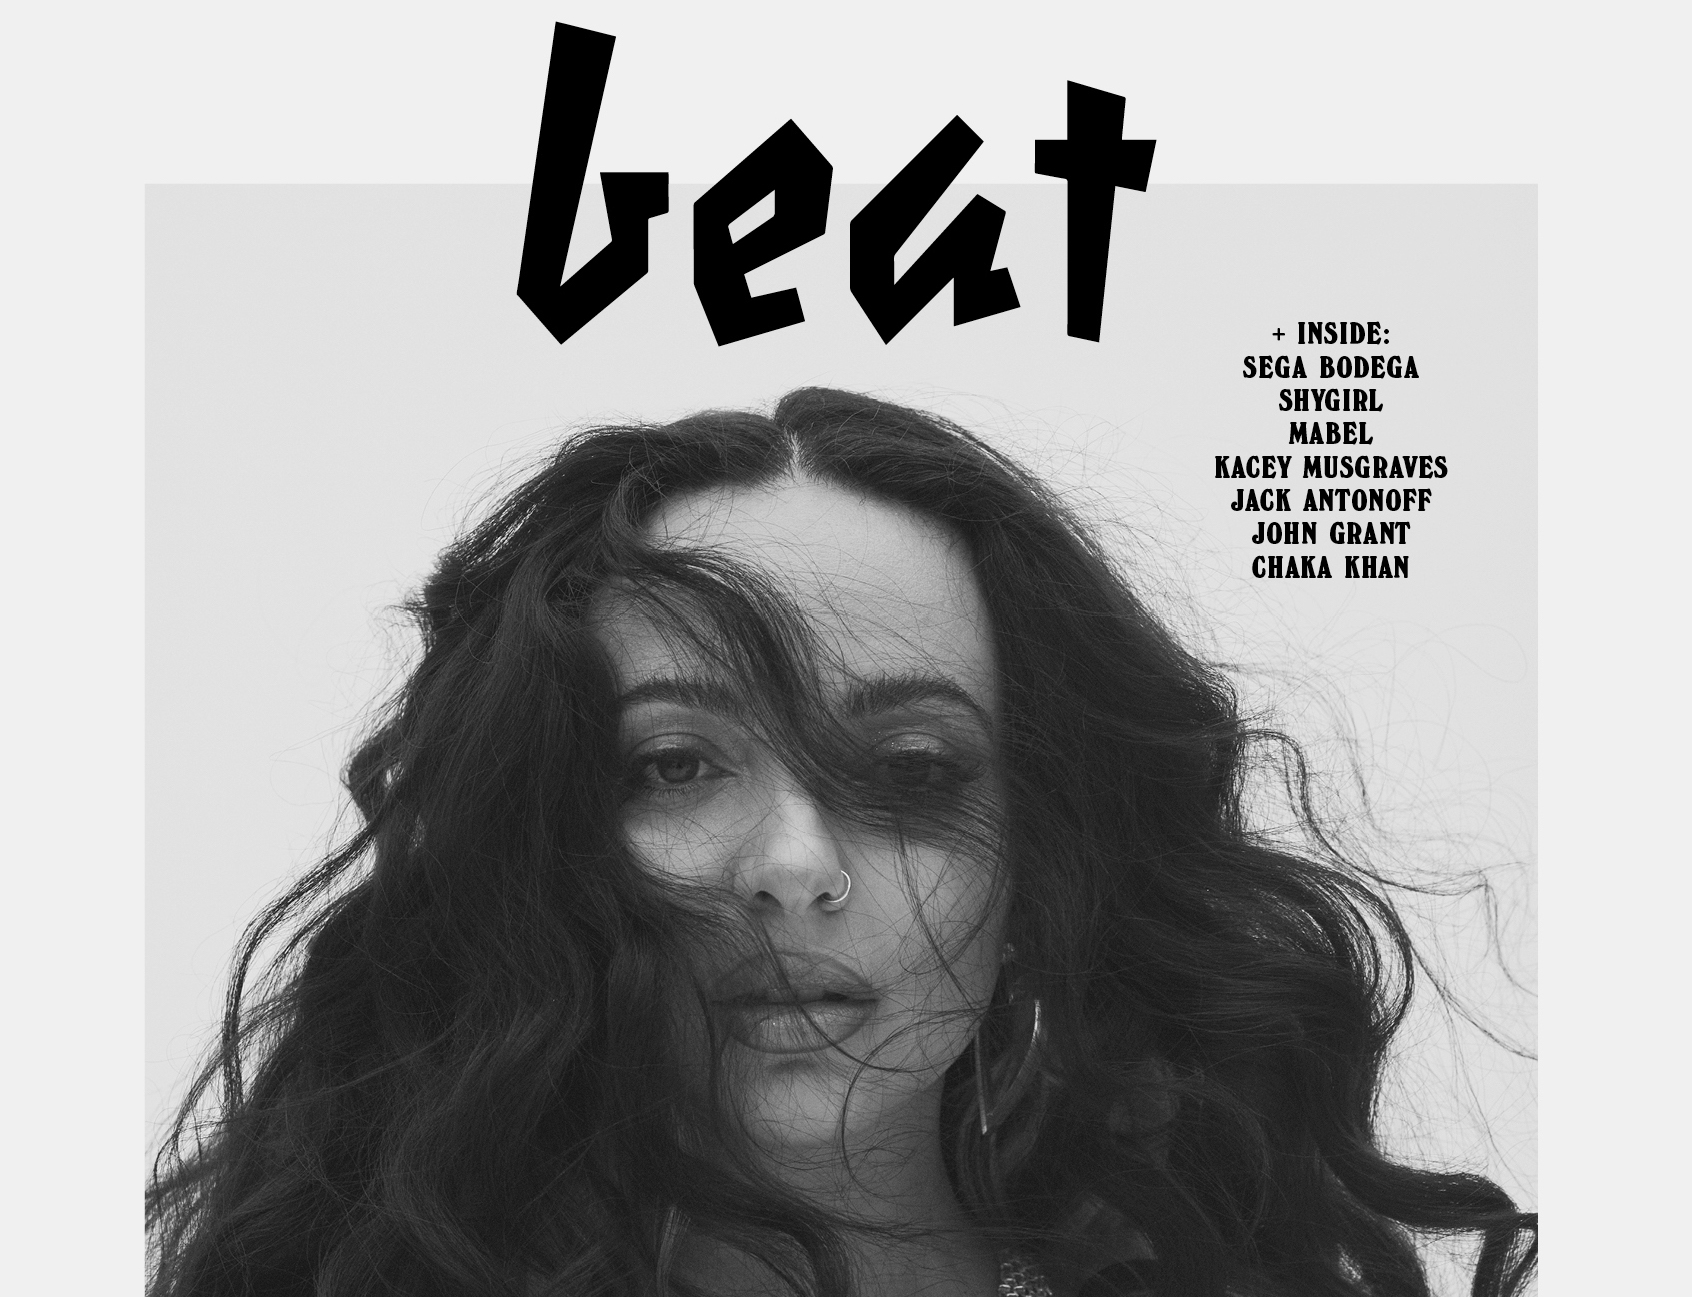 Little Mix’s Jade Thirwall Covers Beat / Talks Solo Deal & Debut Album Being Inspired by Diana Ross & Janet Jackson